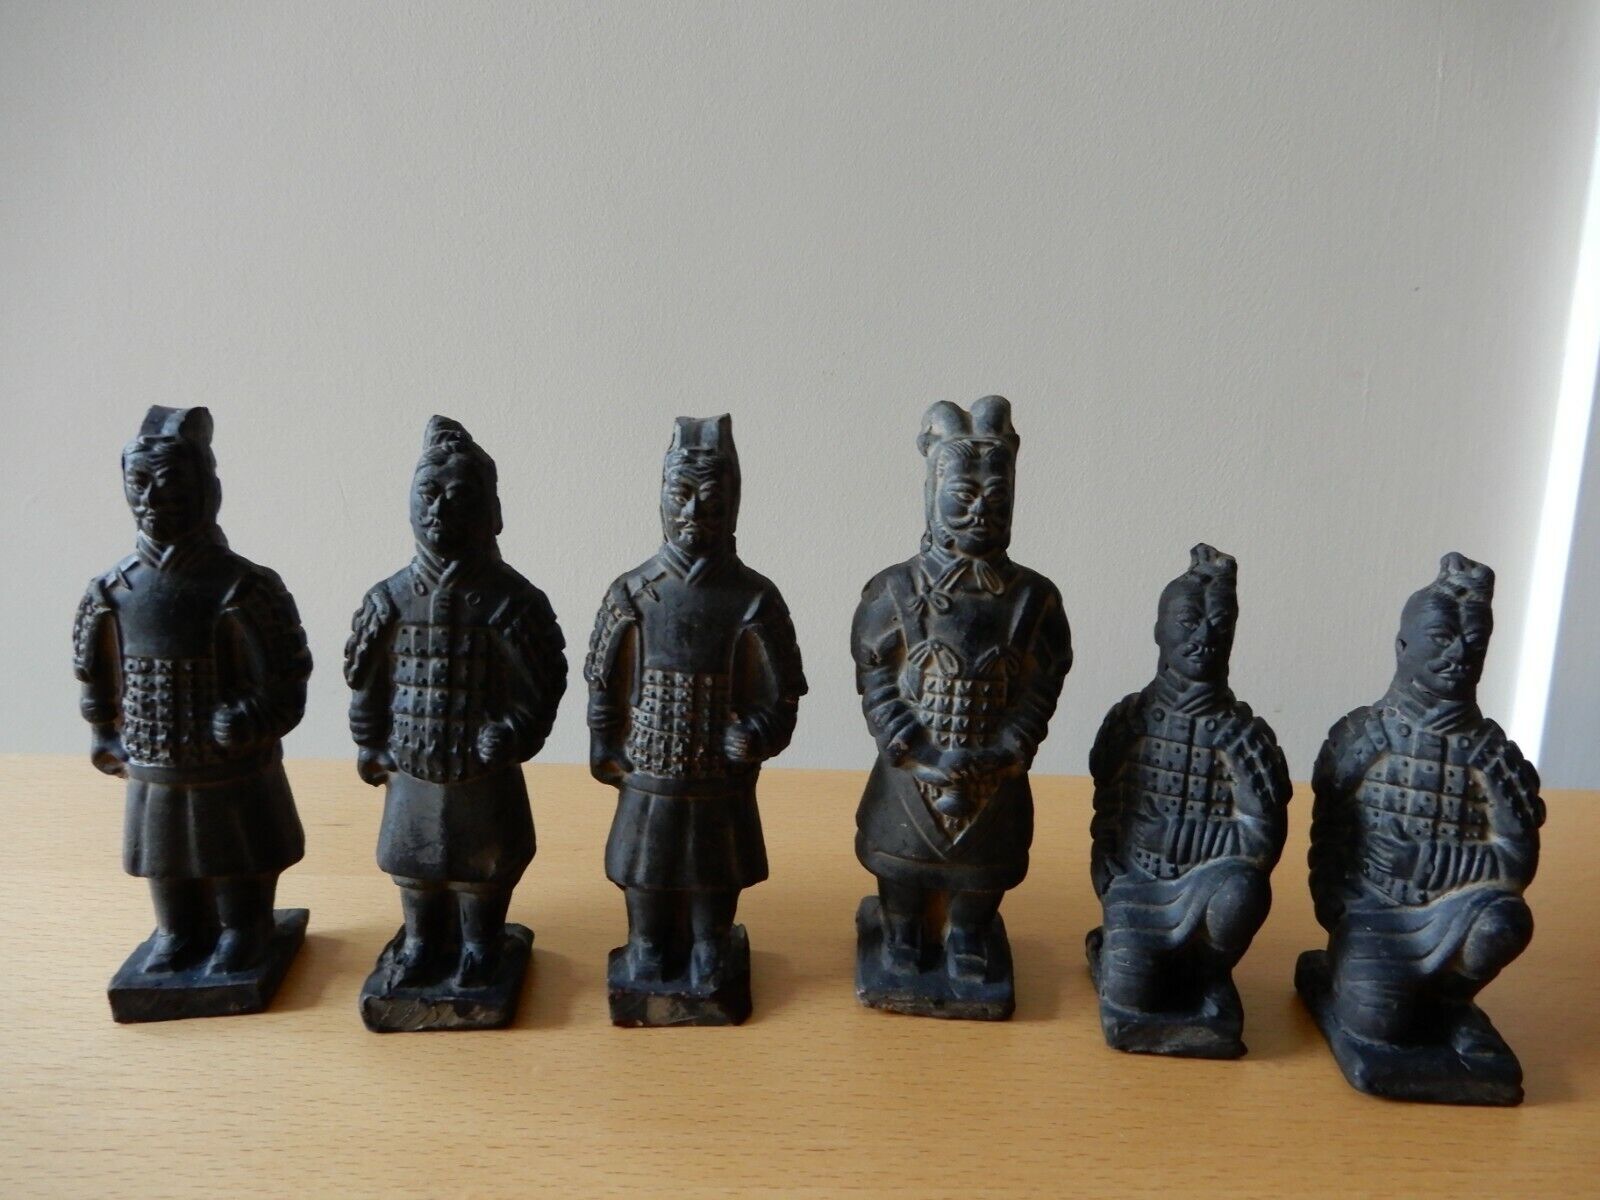 Chinese Terracotta Warrior Figurines, Replicas from Qin Shi Huang's Army